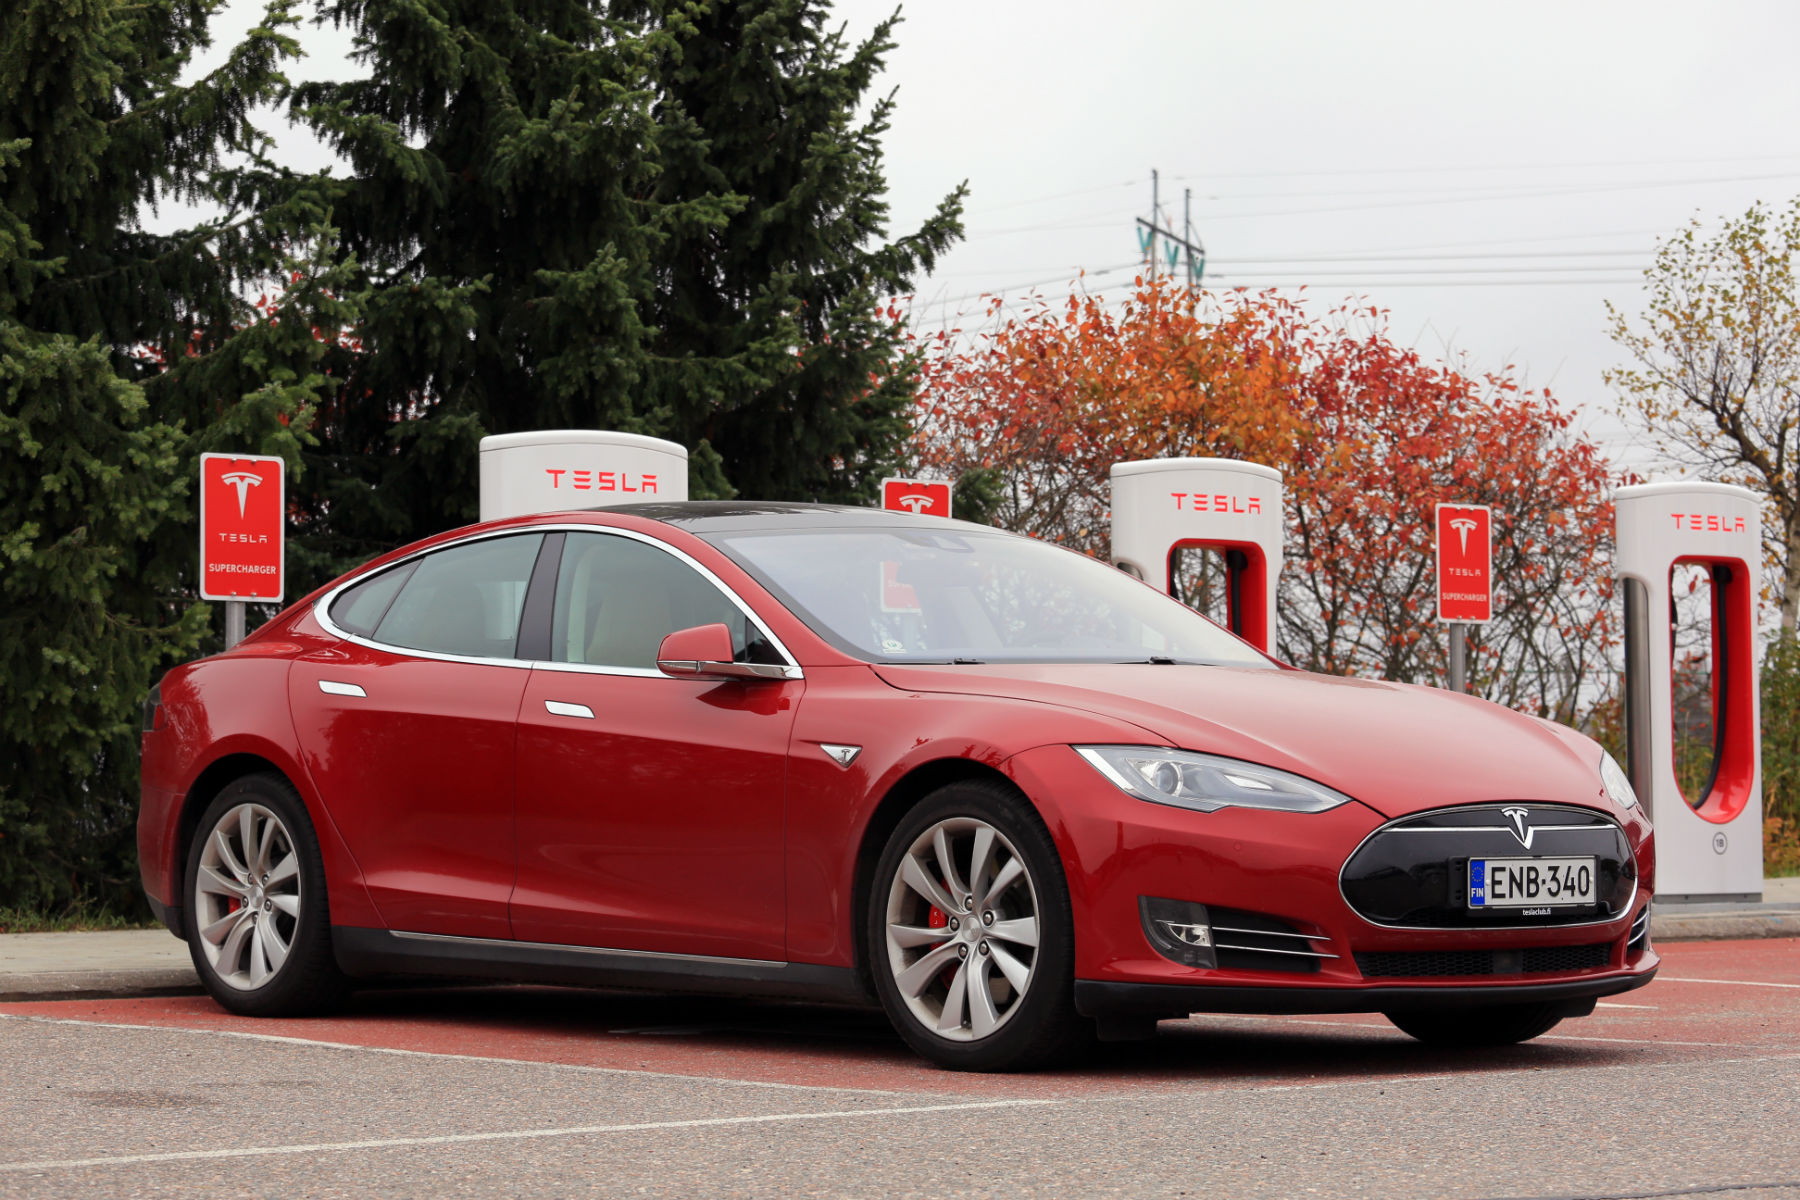 Tesla wants to reinvent the motorway service station